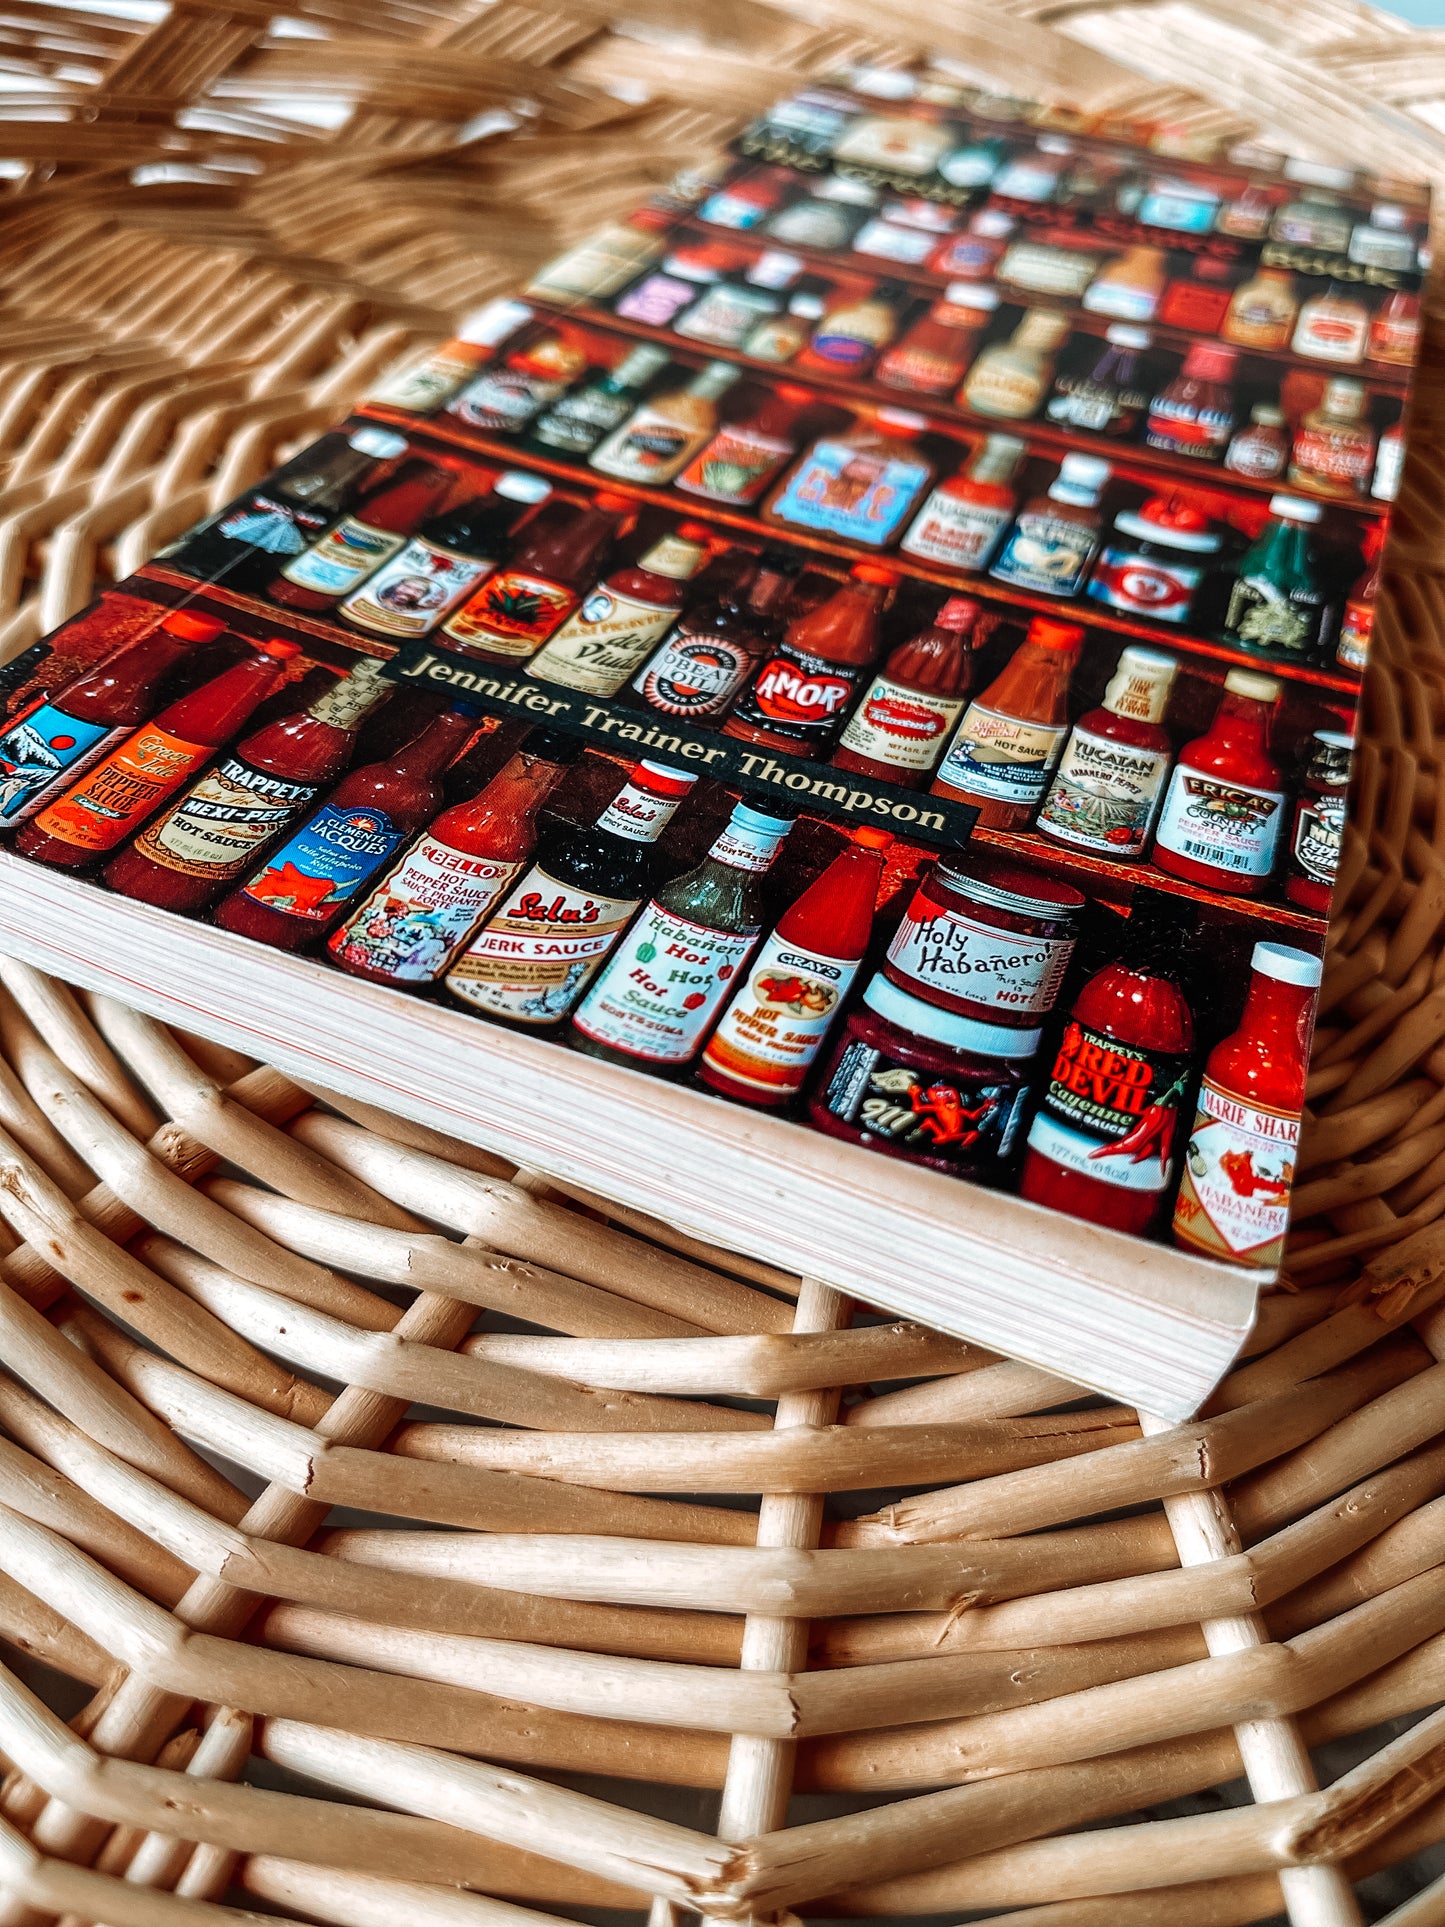 The Great Hot Sauce Book